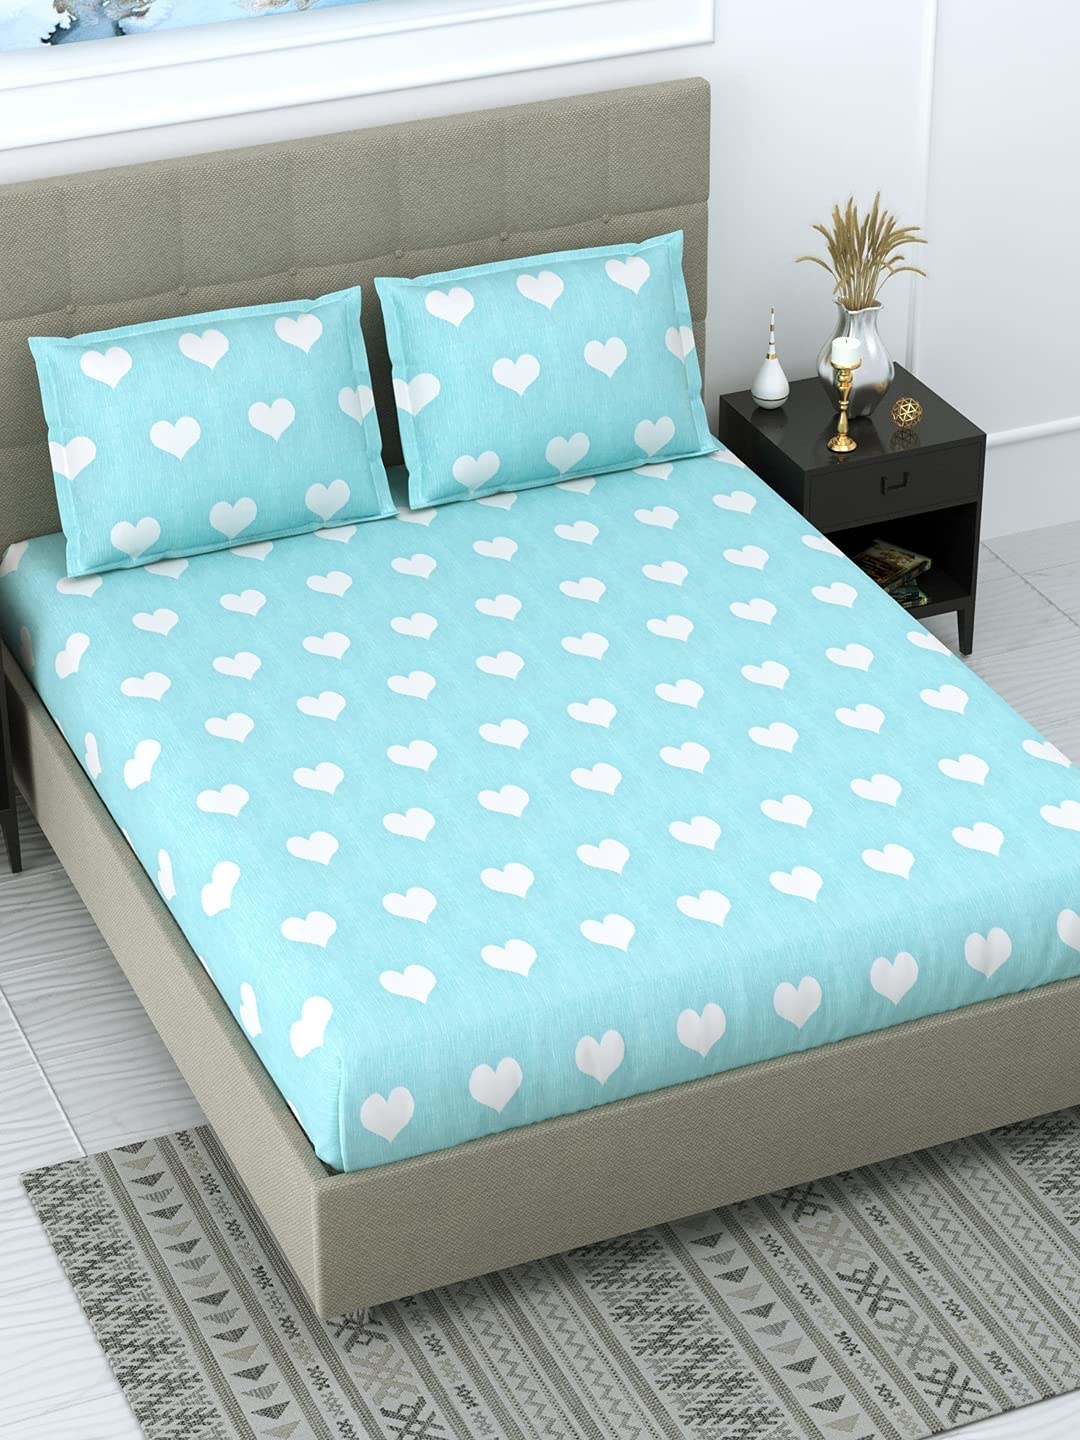 A blue bedsheet with white hearts on it